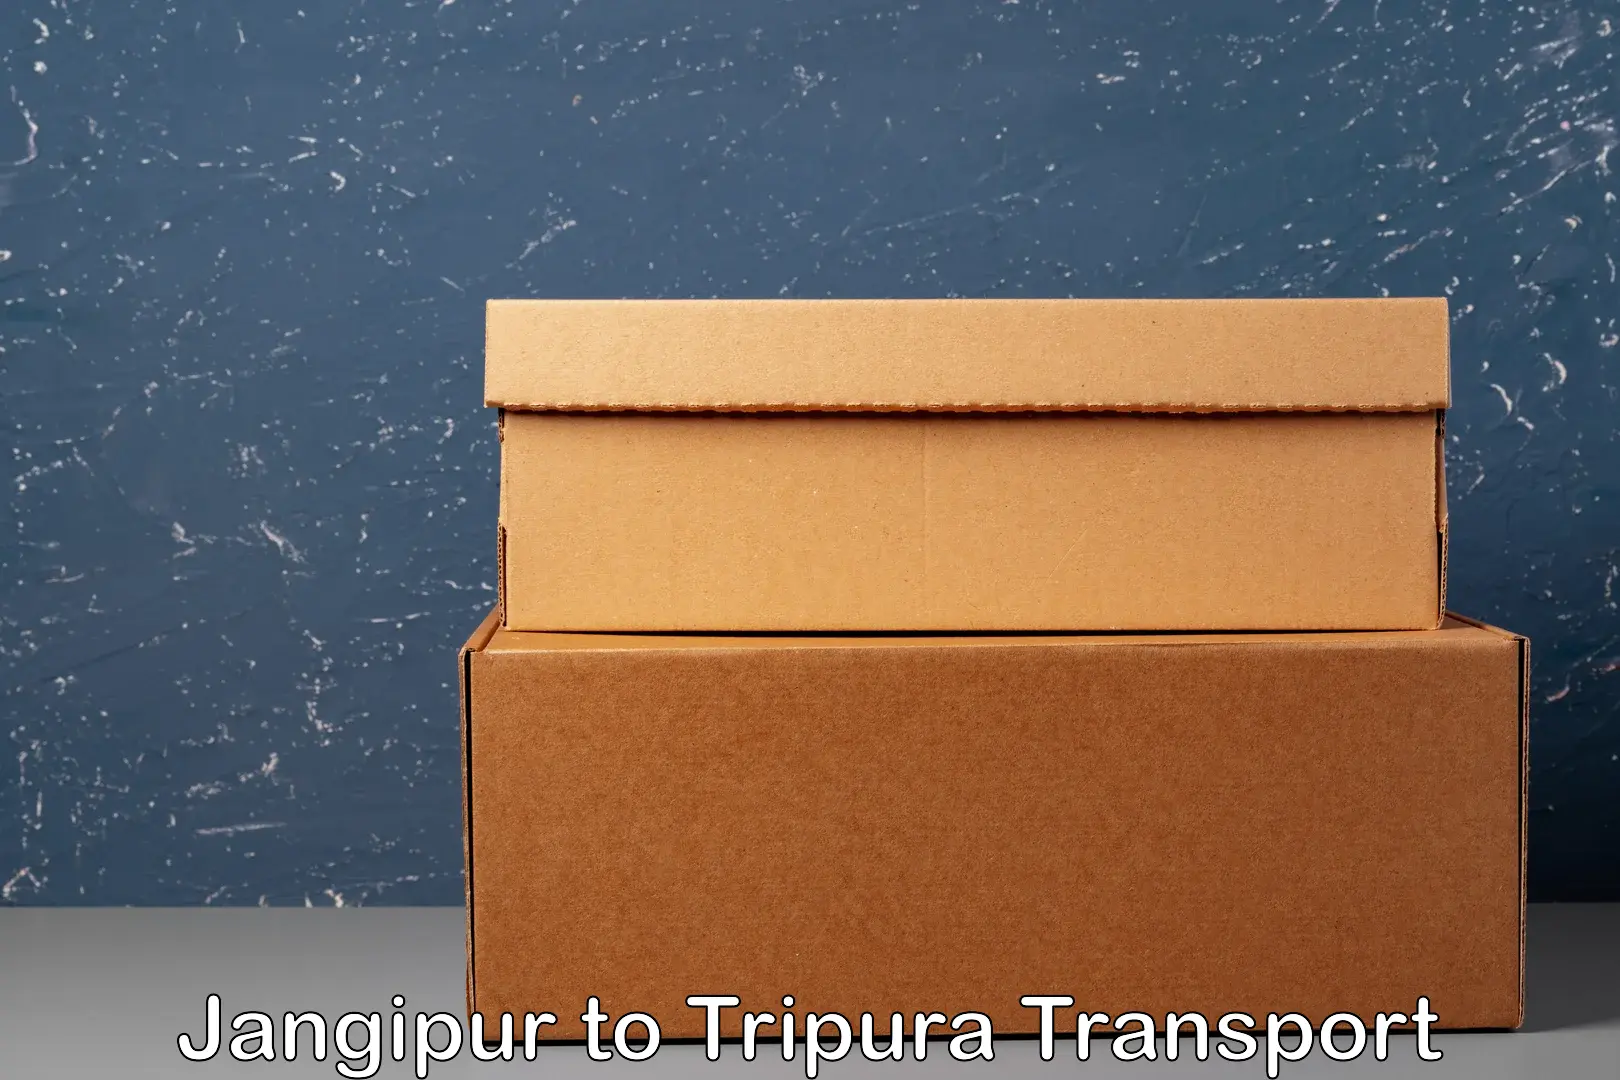 Container transport service in Jangipur to South Tripura